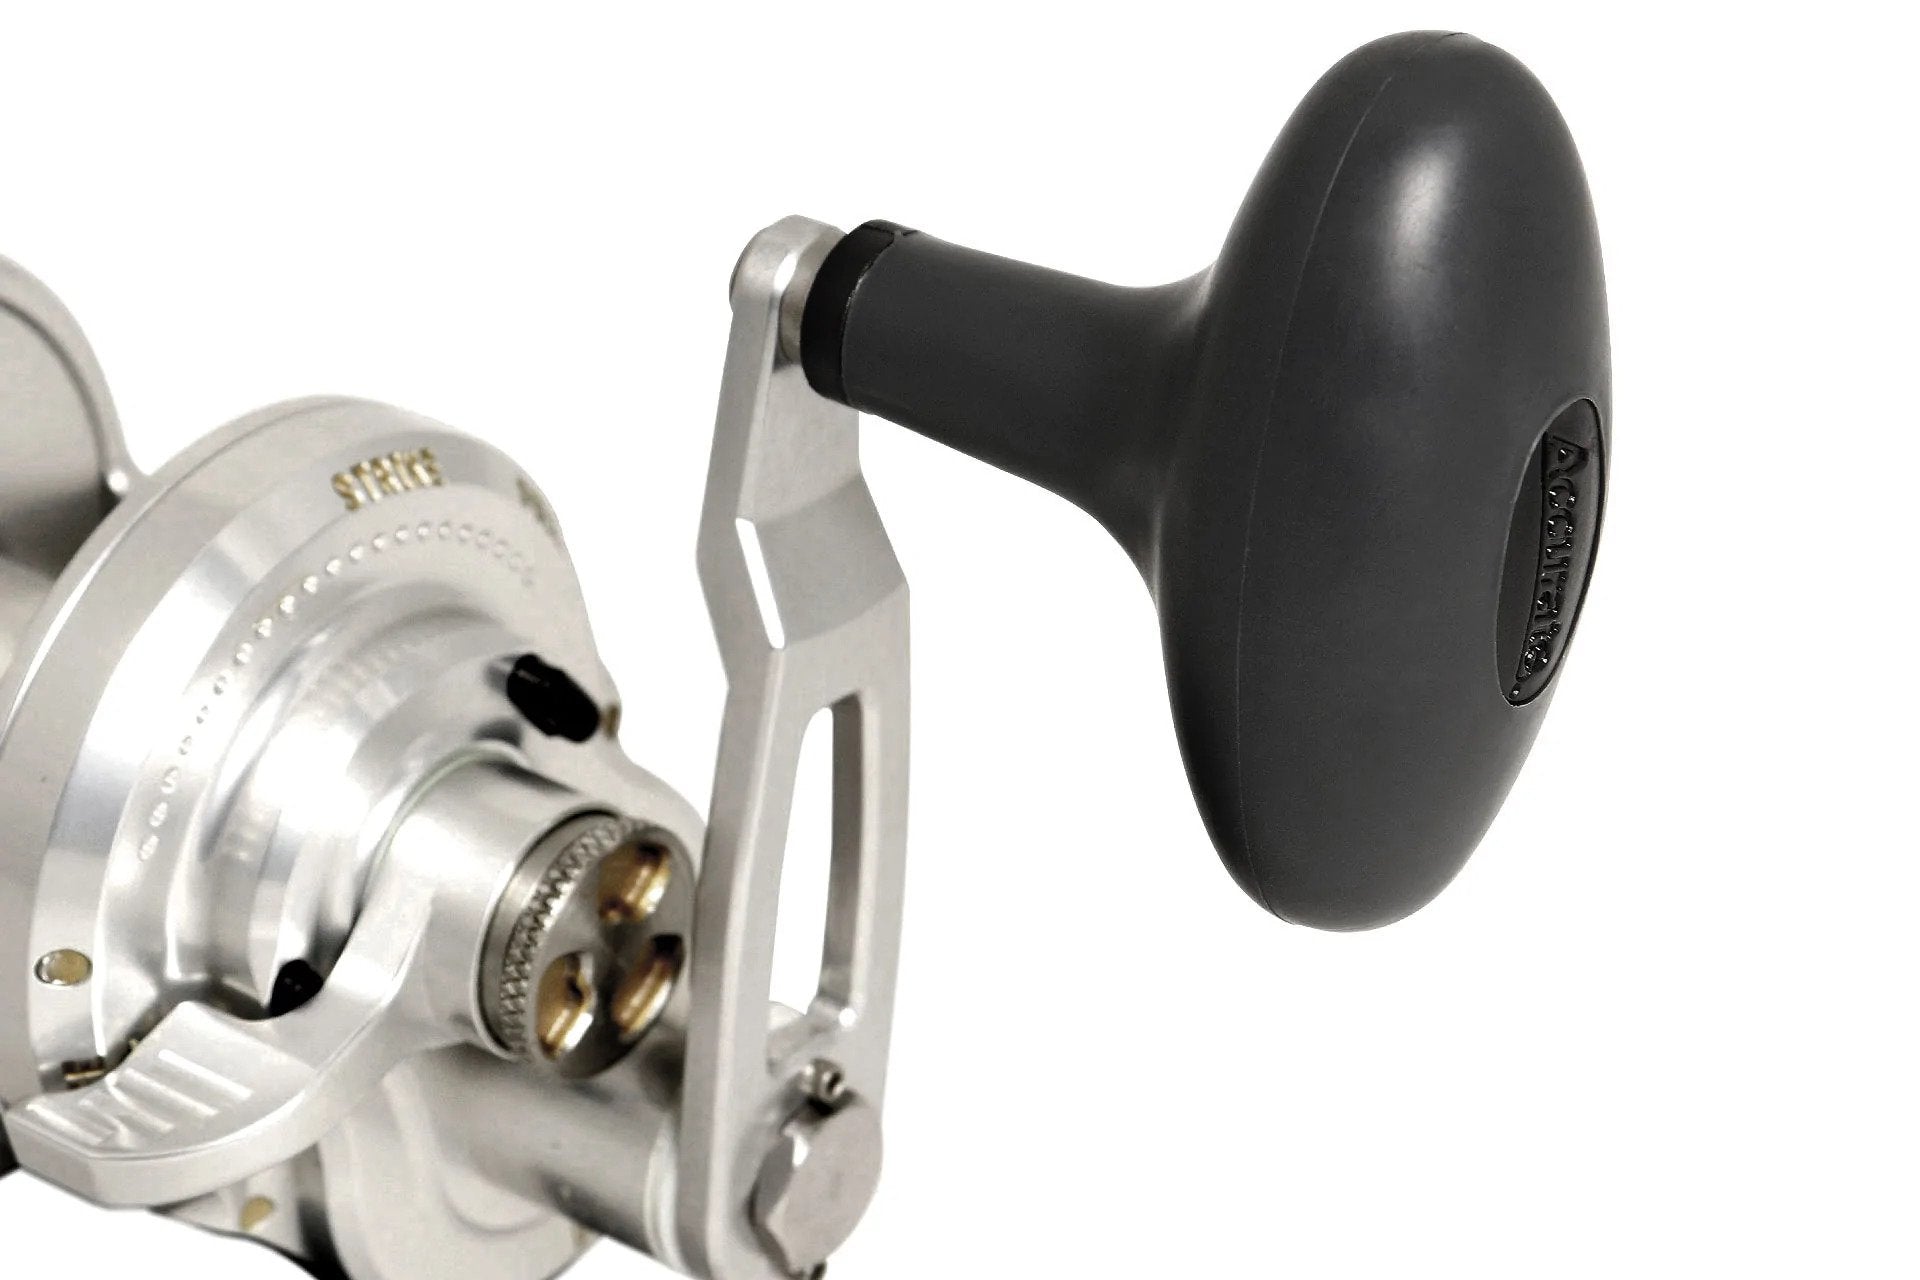 Accurate Boss Fury Conventional Reel- 500- Silver